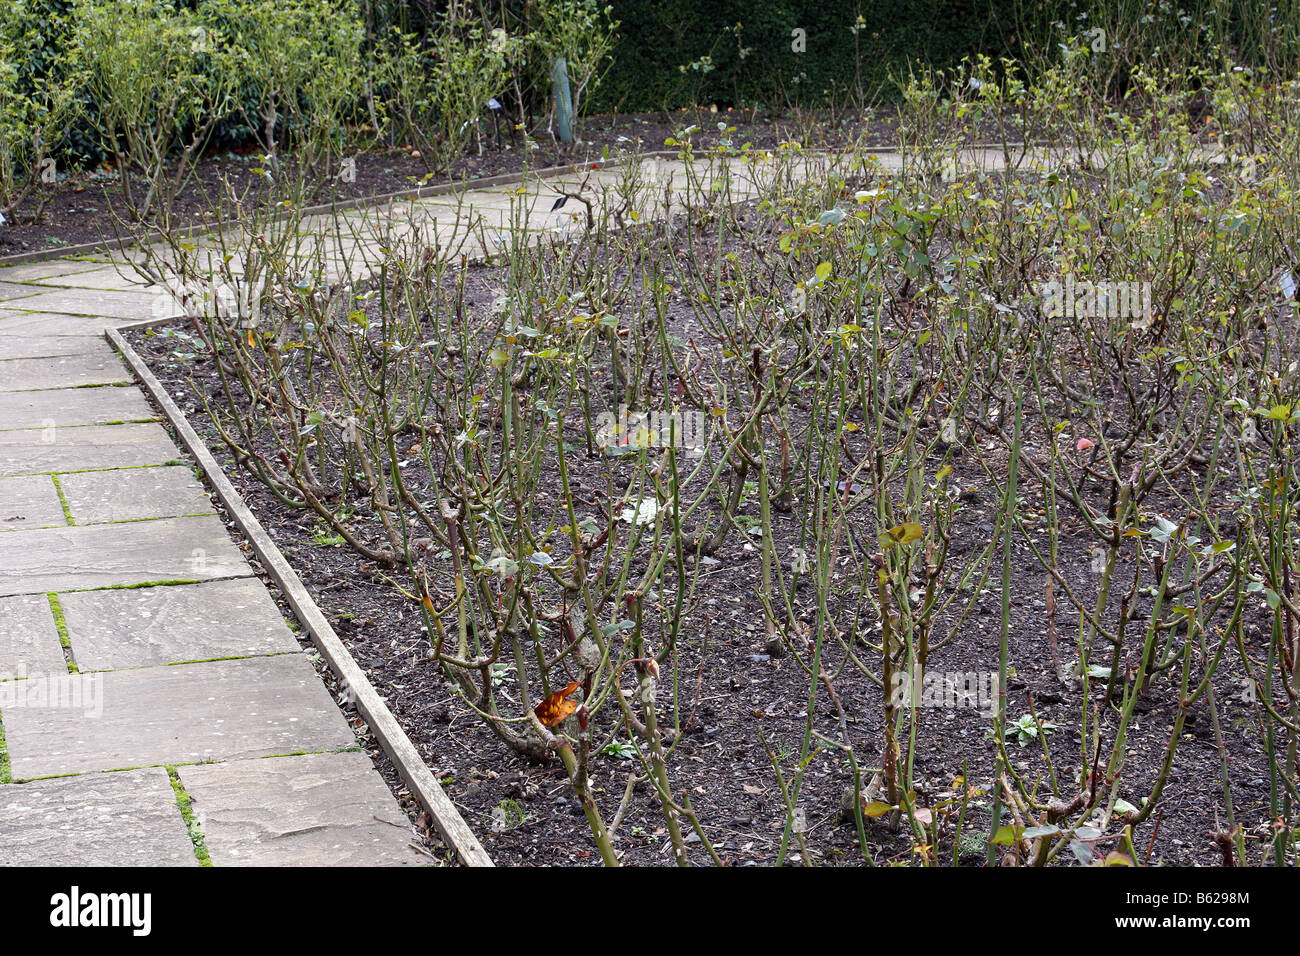 ROSE BEDS IN WINTER AT RHS ROSEMOOR GARDEN DEVON PHOTOGRAPHED WITH RHS PERMIT Stock Photo